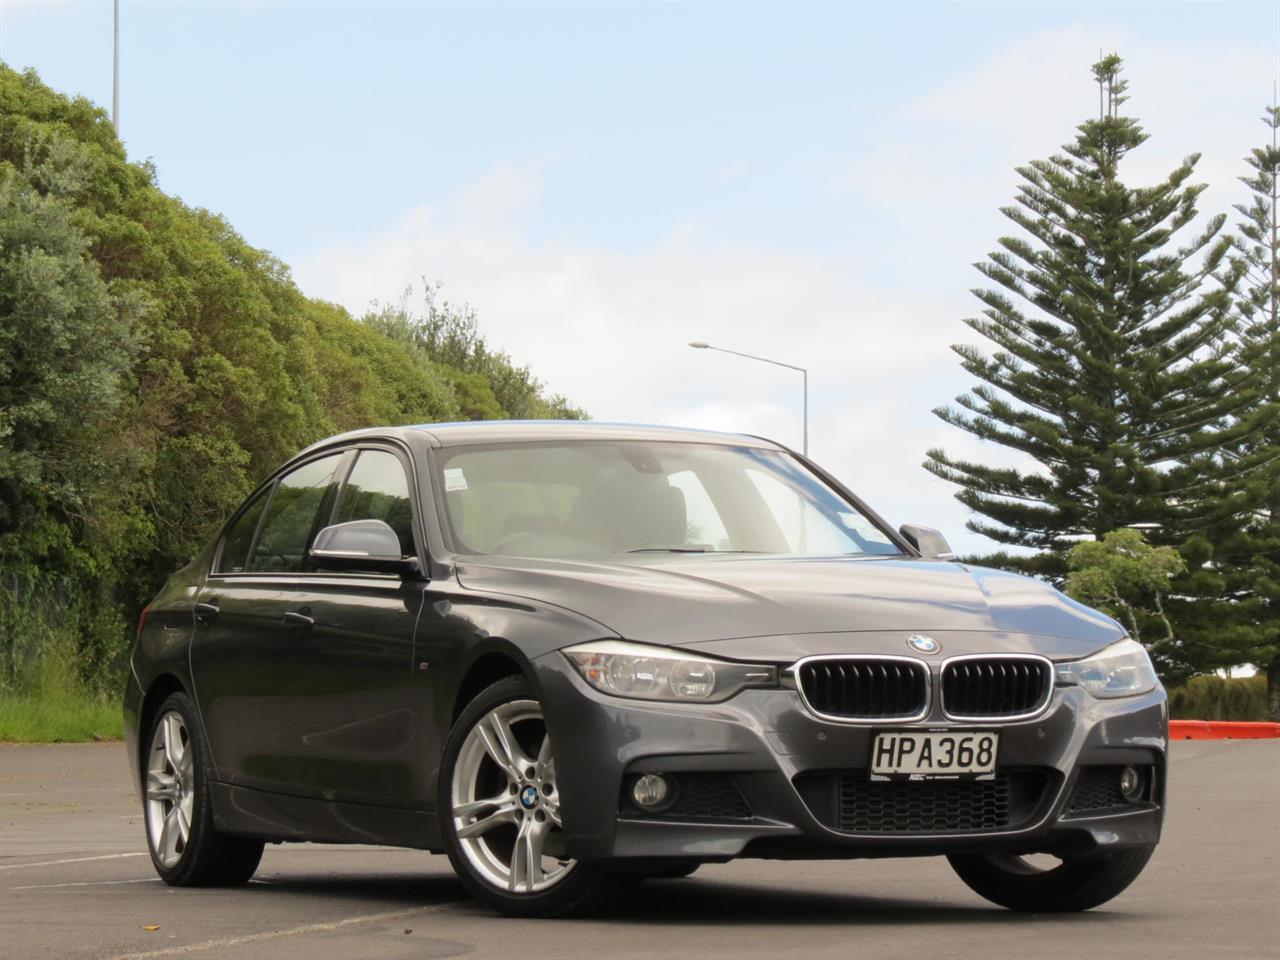 NZC 2014 BMW 320d just arrived to Auckland